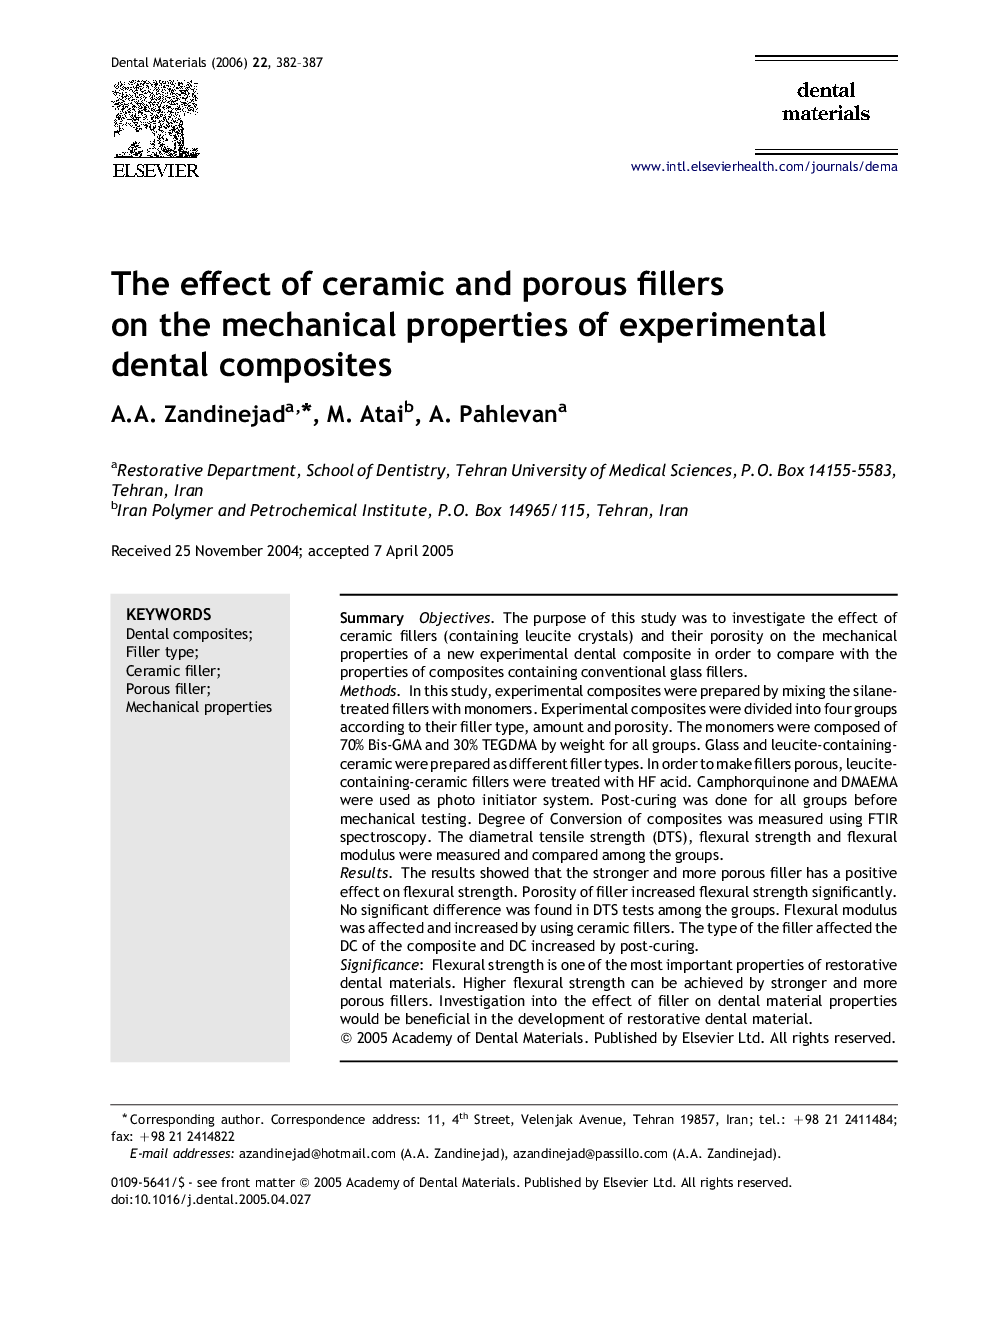 The effect of ceramic and porous fillers on the mechanical properties of experimental dental composites